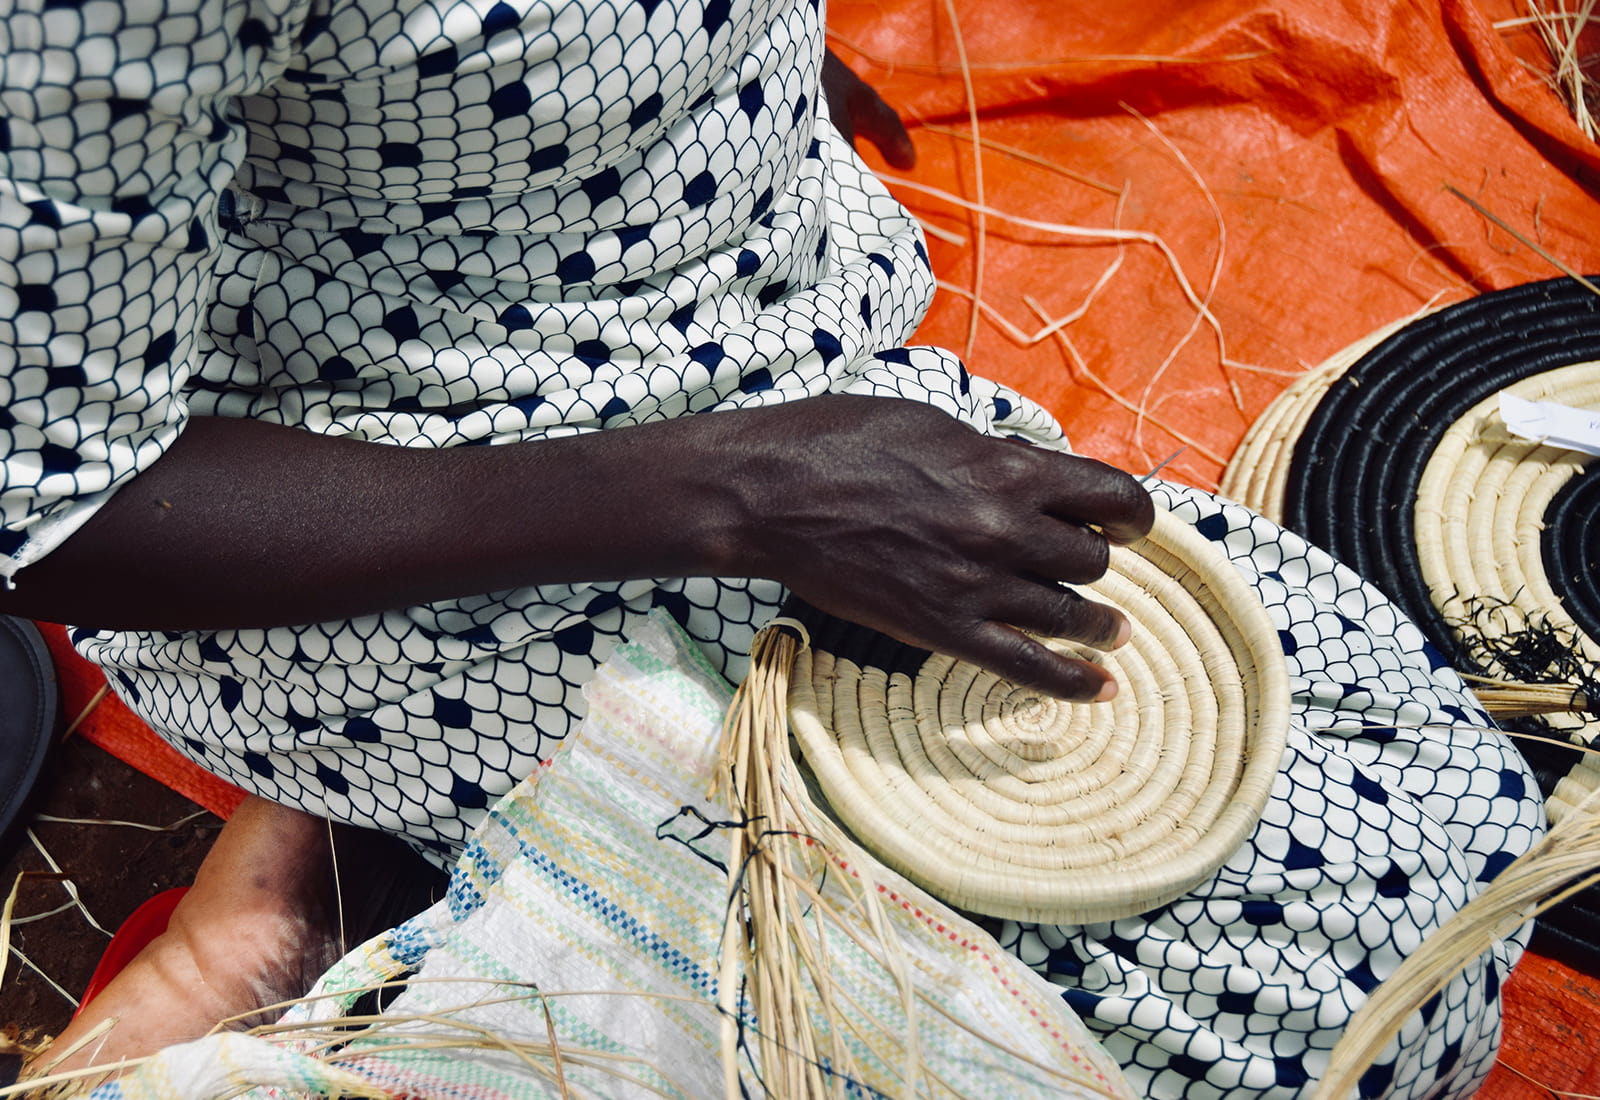 The beginning stages of a utensil holder on the lap of an artisan weaver in Uganda. Photo credit: Nest